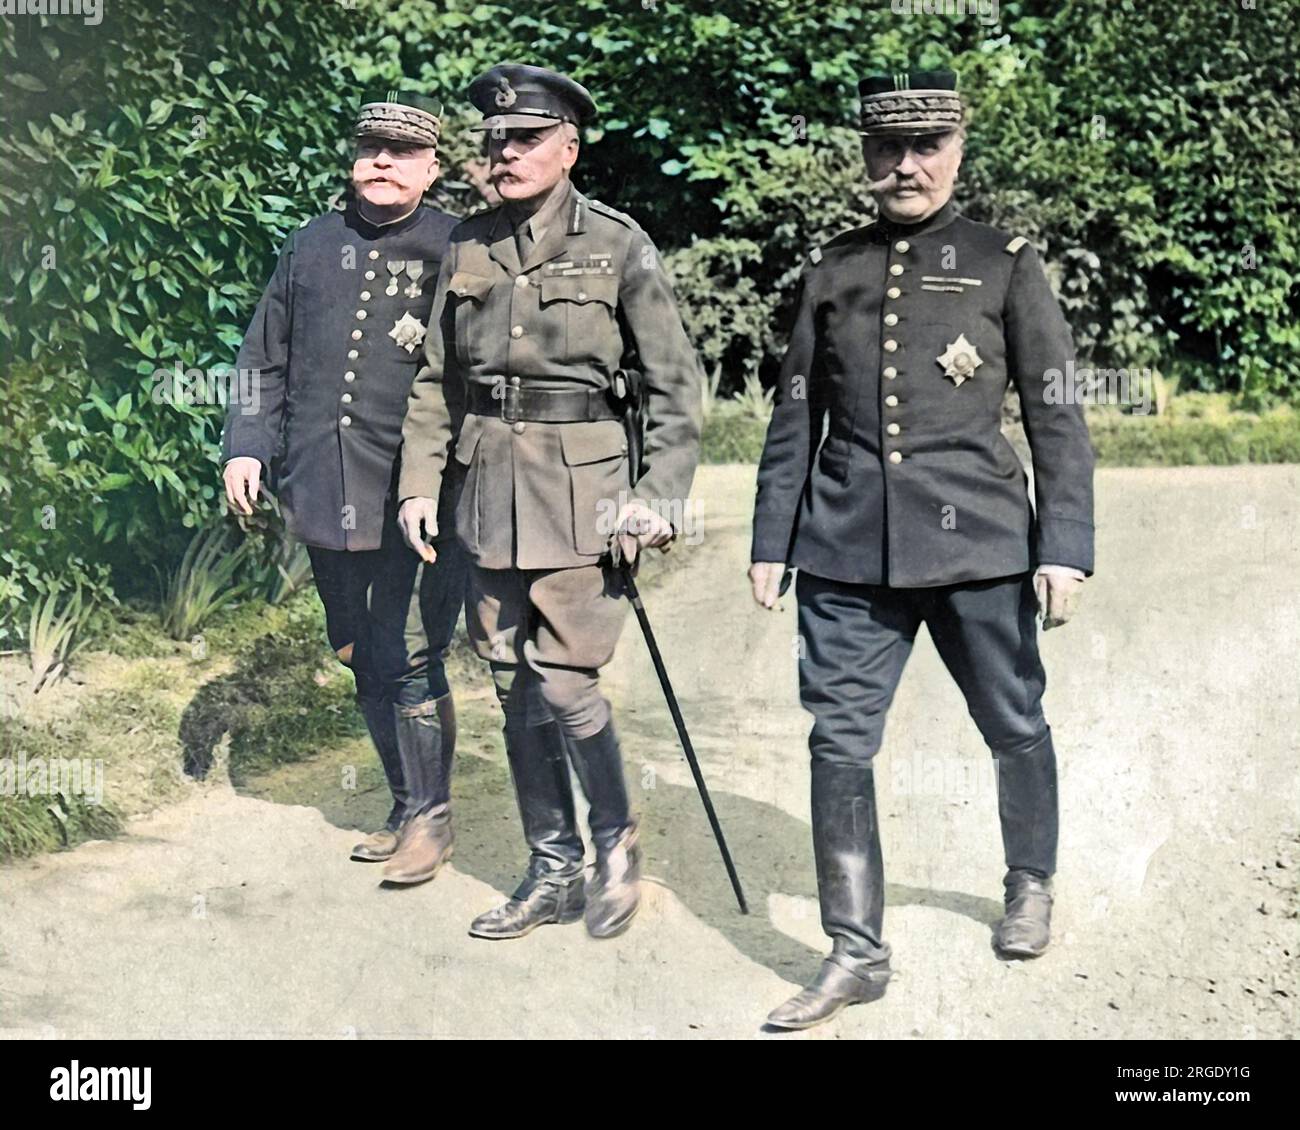 Sir Douglas Haig with French Generals Joffre and Foch, probably at Beauquesne, France, in August 1916 during a visit from King George V, World War One. Stock Photo